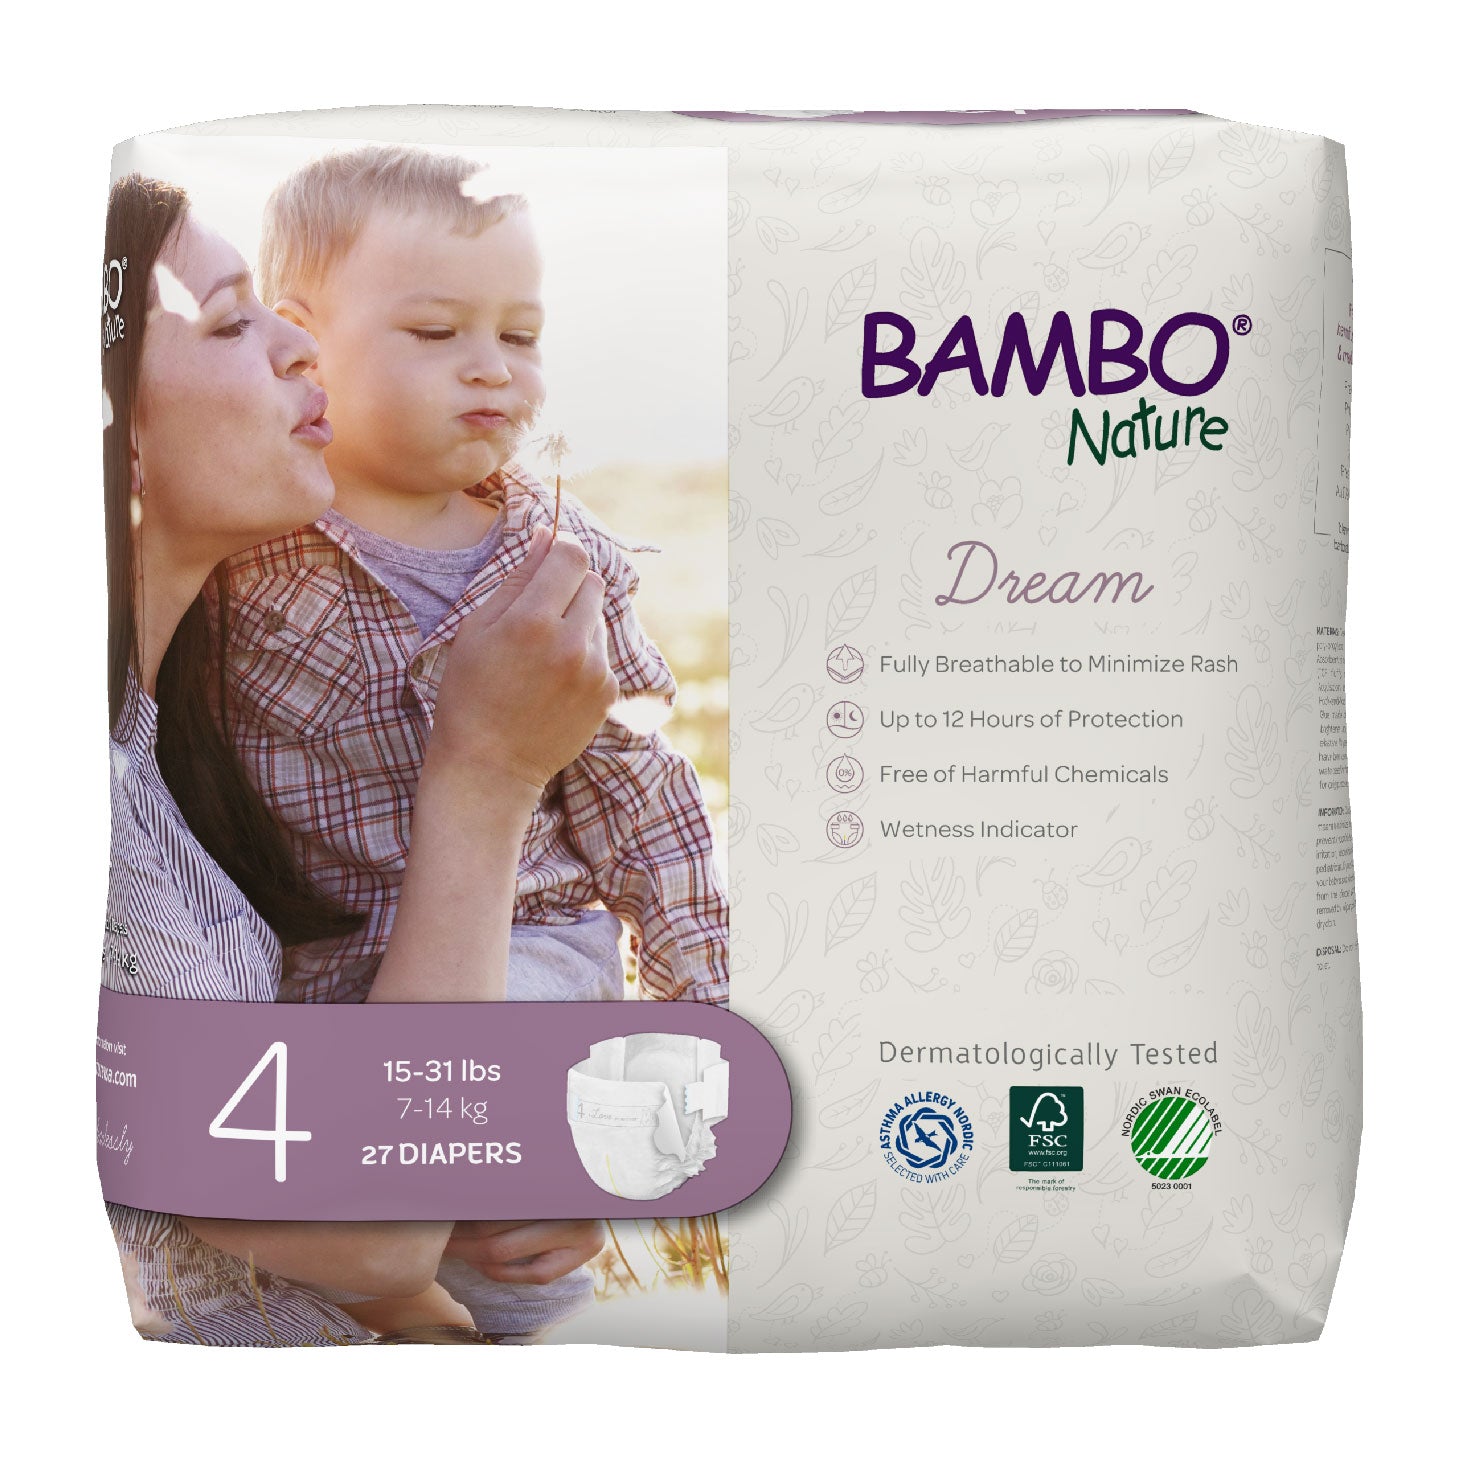 Bambo Nature 2 Couches Taille S 3-6 kg 30 unités